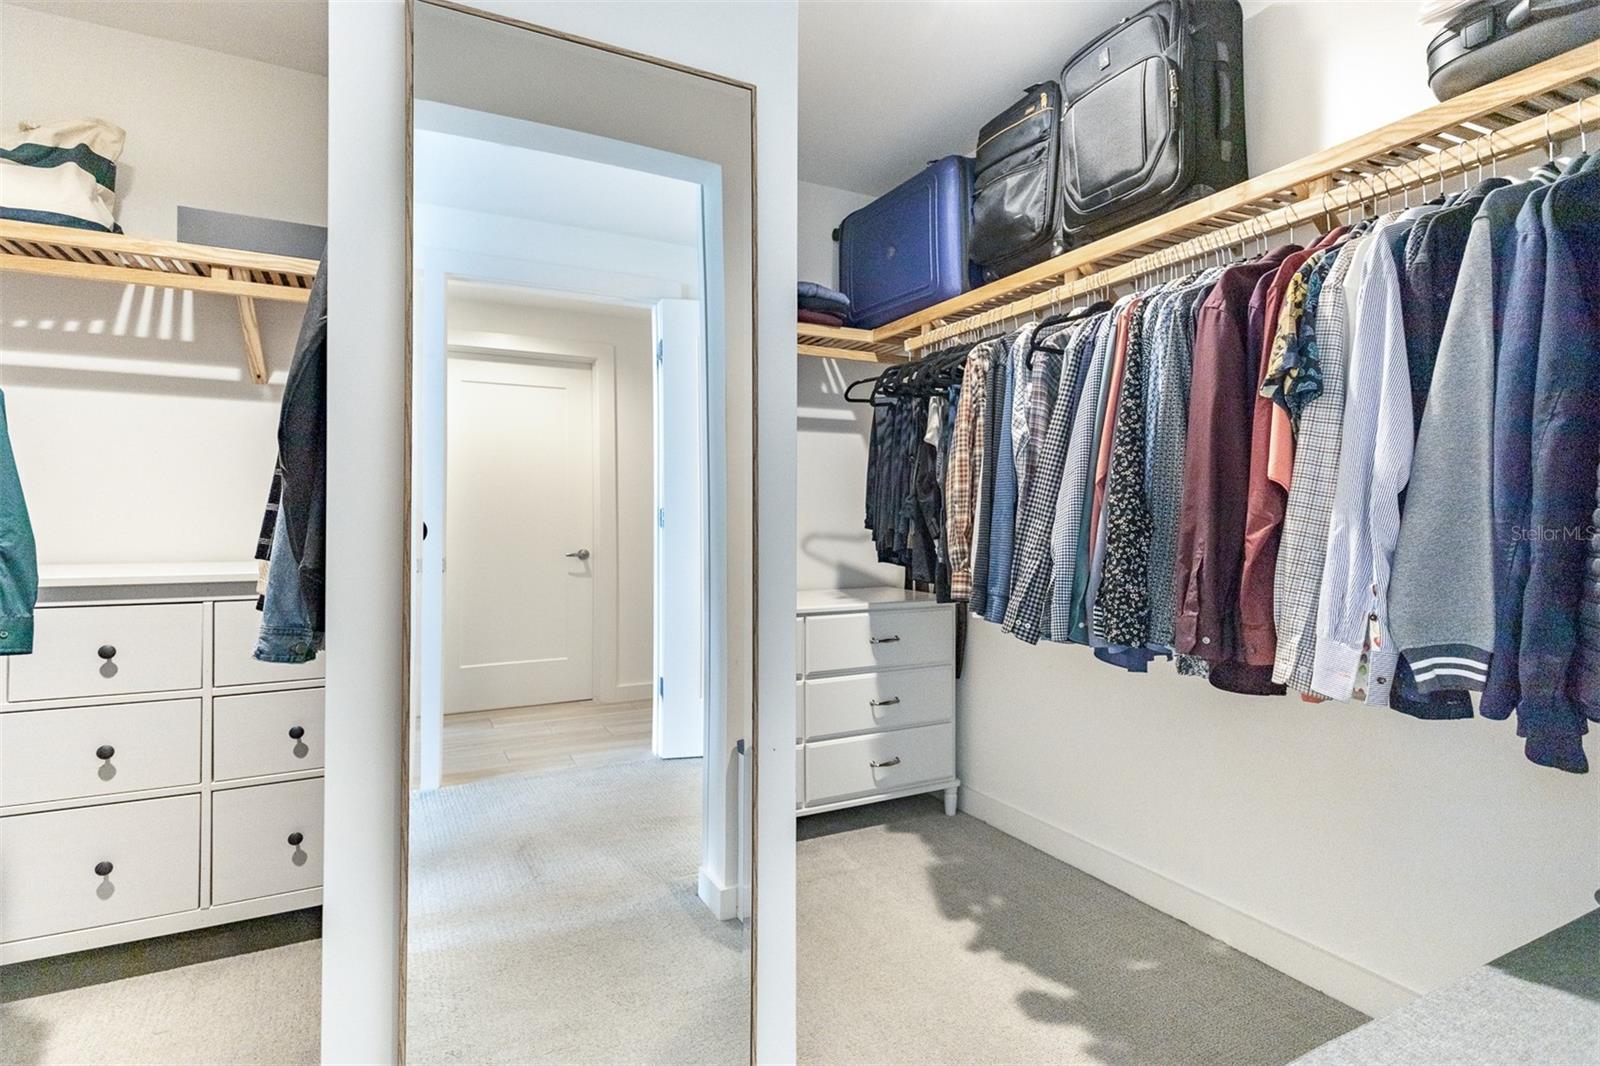 Large walk-in closet complete with dressers and mirror